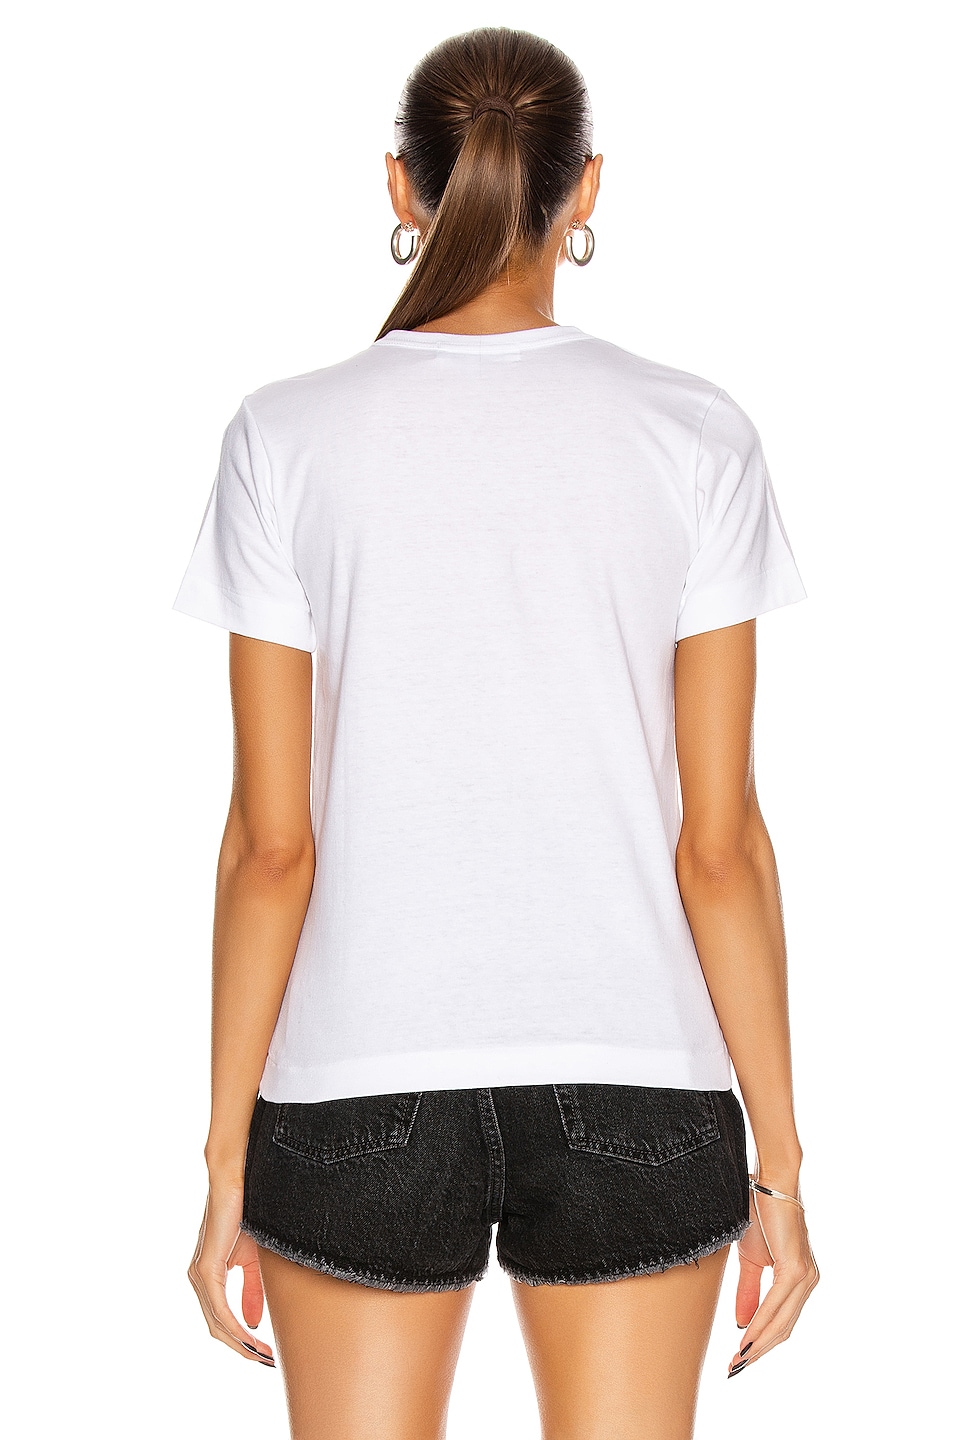 COMME des GARCONS PLAY Jersey Black Print Tee in White | FWRD